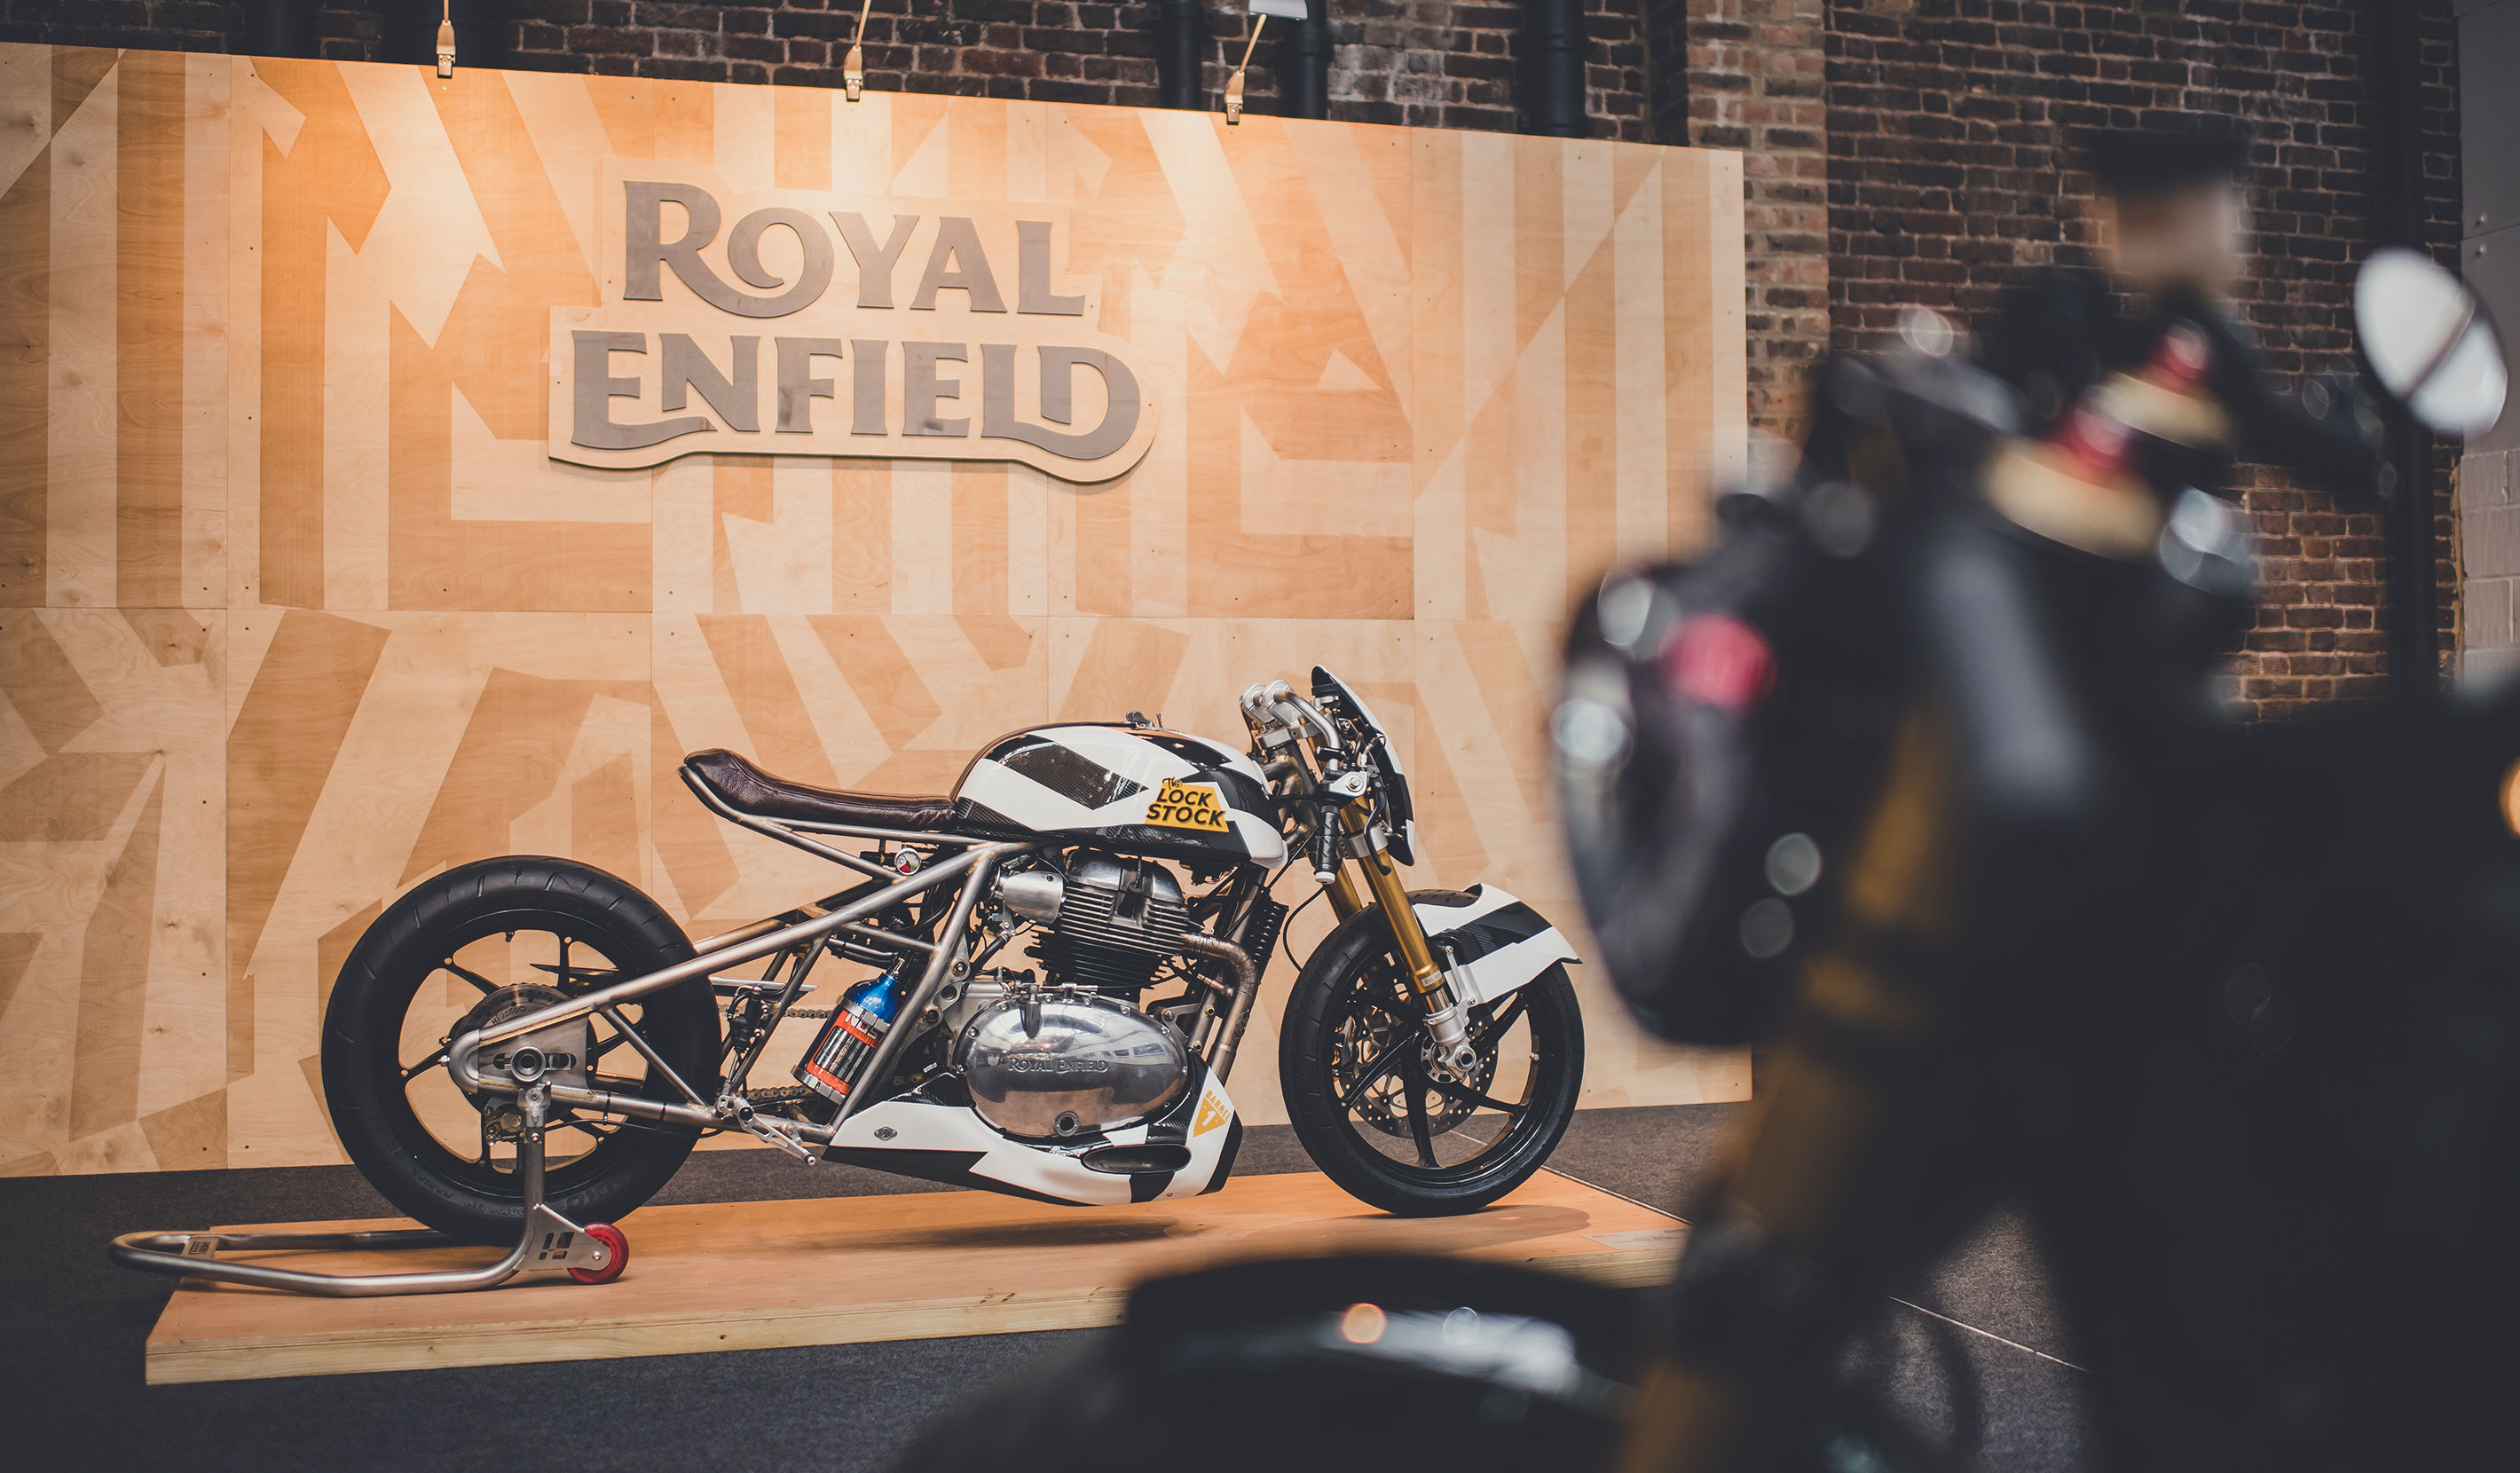 Space-worldwide-Royal Enfield bike shed london exhibition design trade show